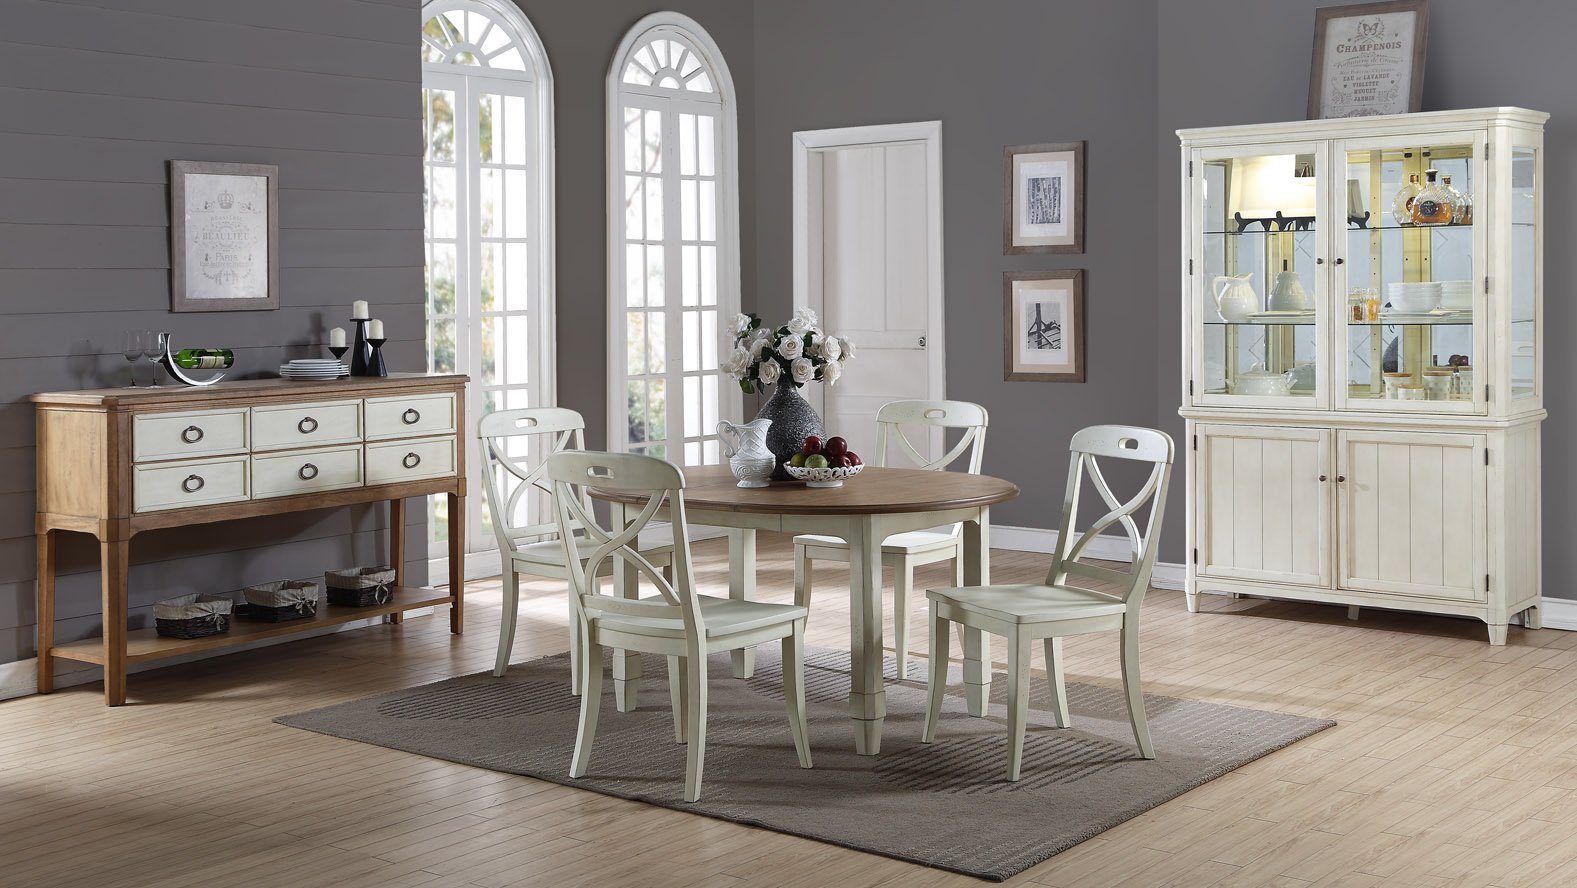 Millbrook Dining white chairs